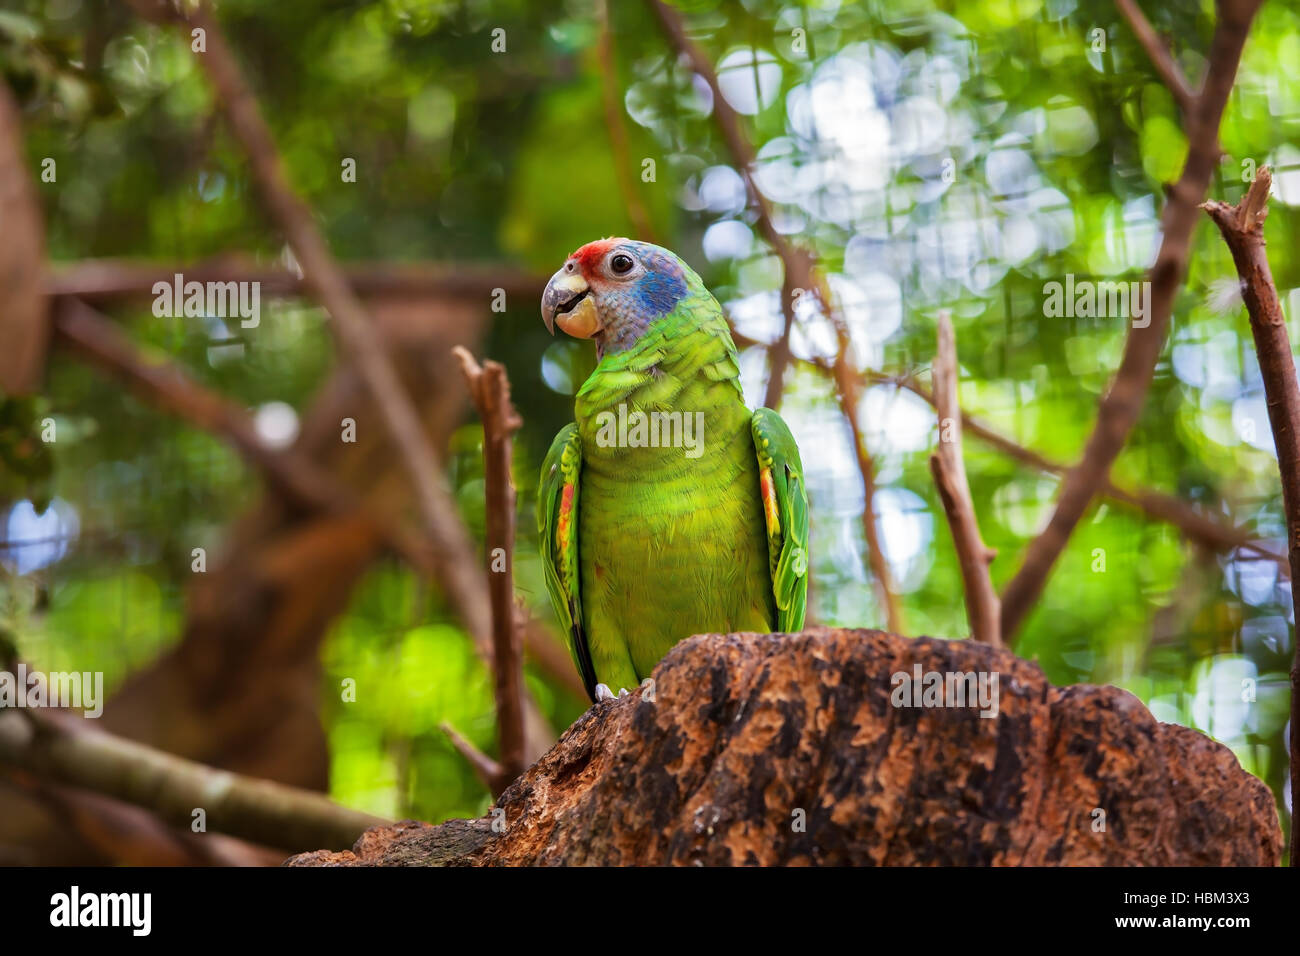 Brightly colored parrot Stock Photo